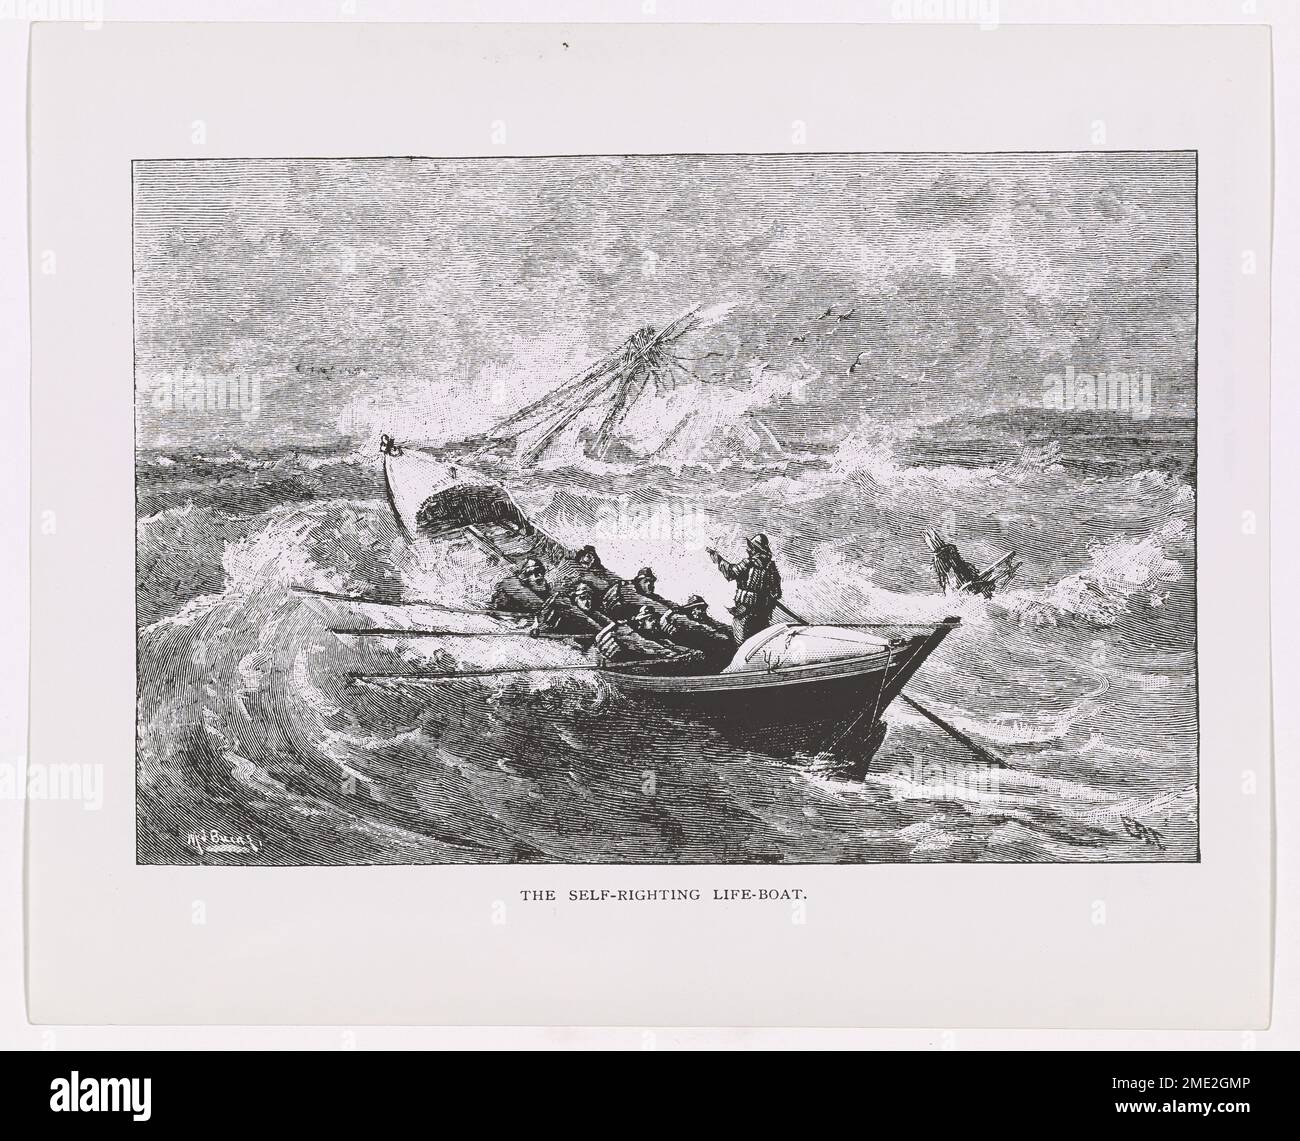 The Self-righting Lifeboat. Oldtimer Lifesavers - One of a series of sketches on the former U.S. Lifesaving Services (forerunner of the U.S. Coast Guard), by M. J. Burns c. 1879 and c. 1900, published in the Old Harper's Weeklies. In some of the sketches there appear other initials in addition to Burns' name. Sketch from Old Harper's Weekly 'The Self-righting Lifeboat' going to rescue sinking vessel used by U.S. Lifesaving Service. Stock Photo